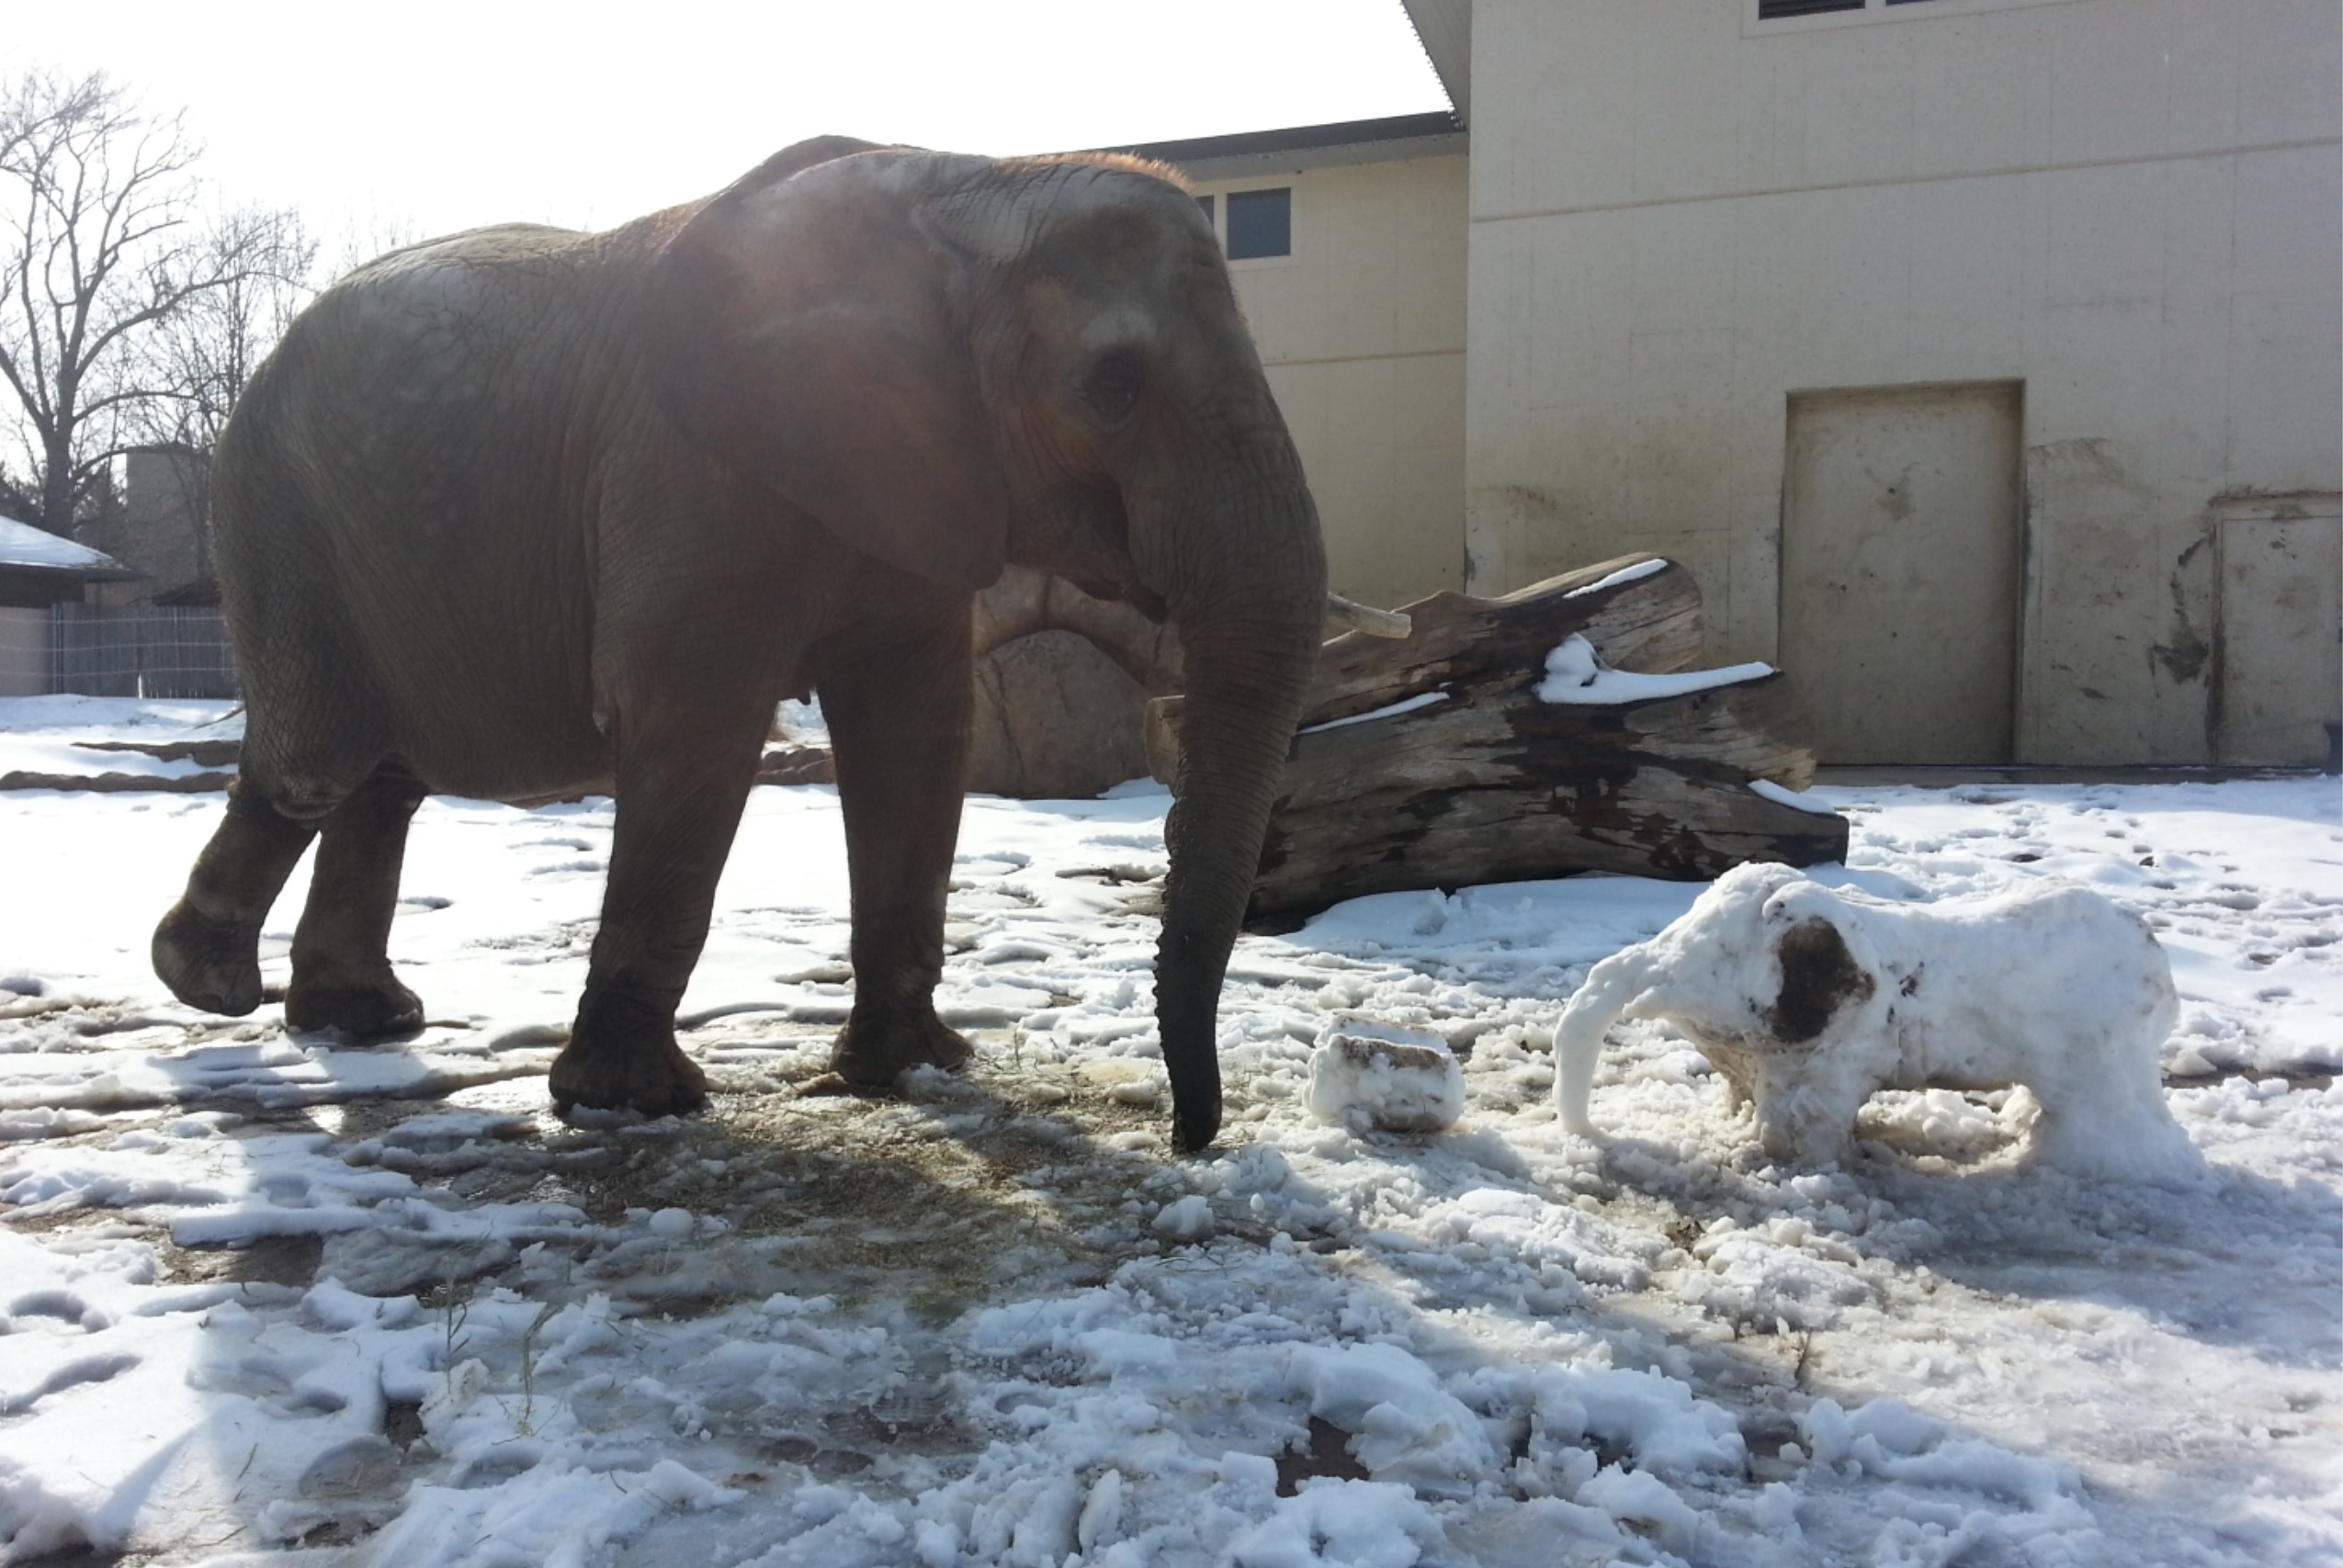 Tembo the African Elephant enjoying enrichment prepared by her zookeepers.